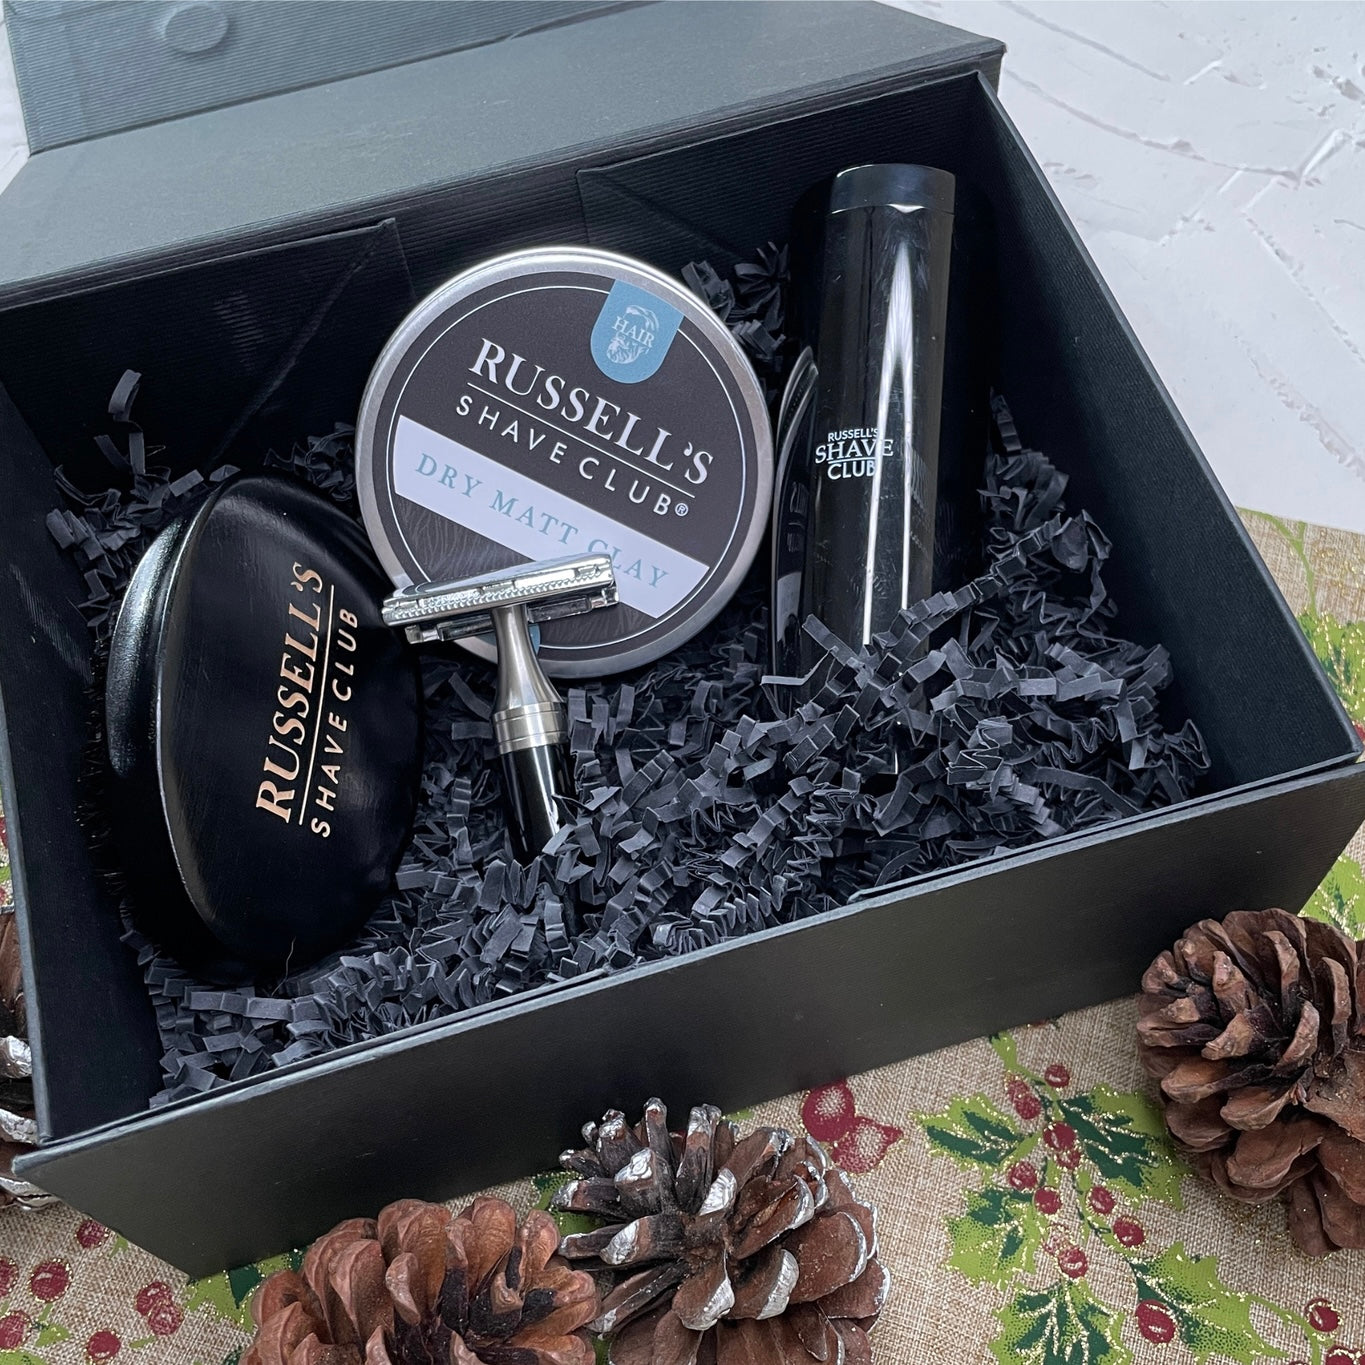 Gift Hamper - Build your own gift set specifically for your loved one